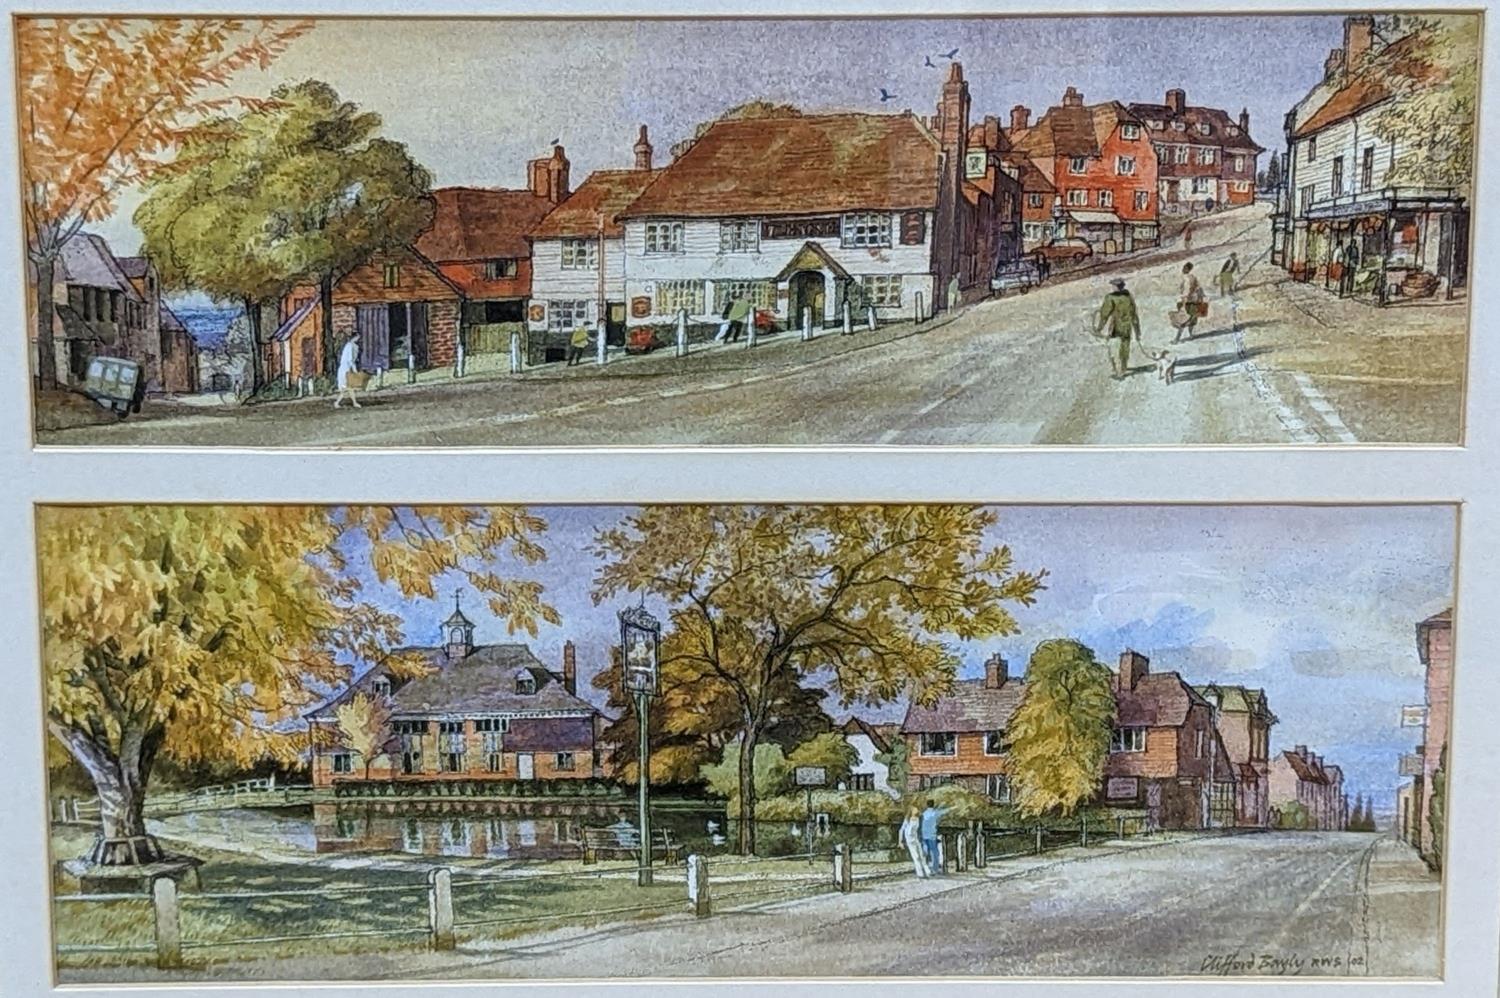 Clifford Bayly, R.W.S., (b.1927), two ink and watercolours, 'The Vine Public House' and 'Duck